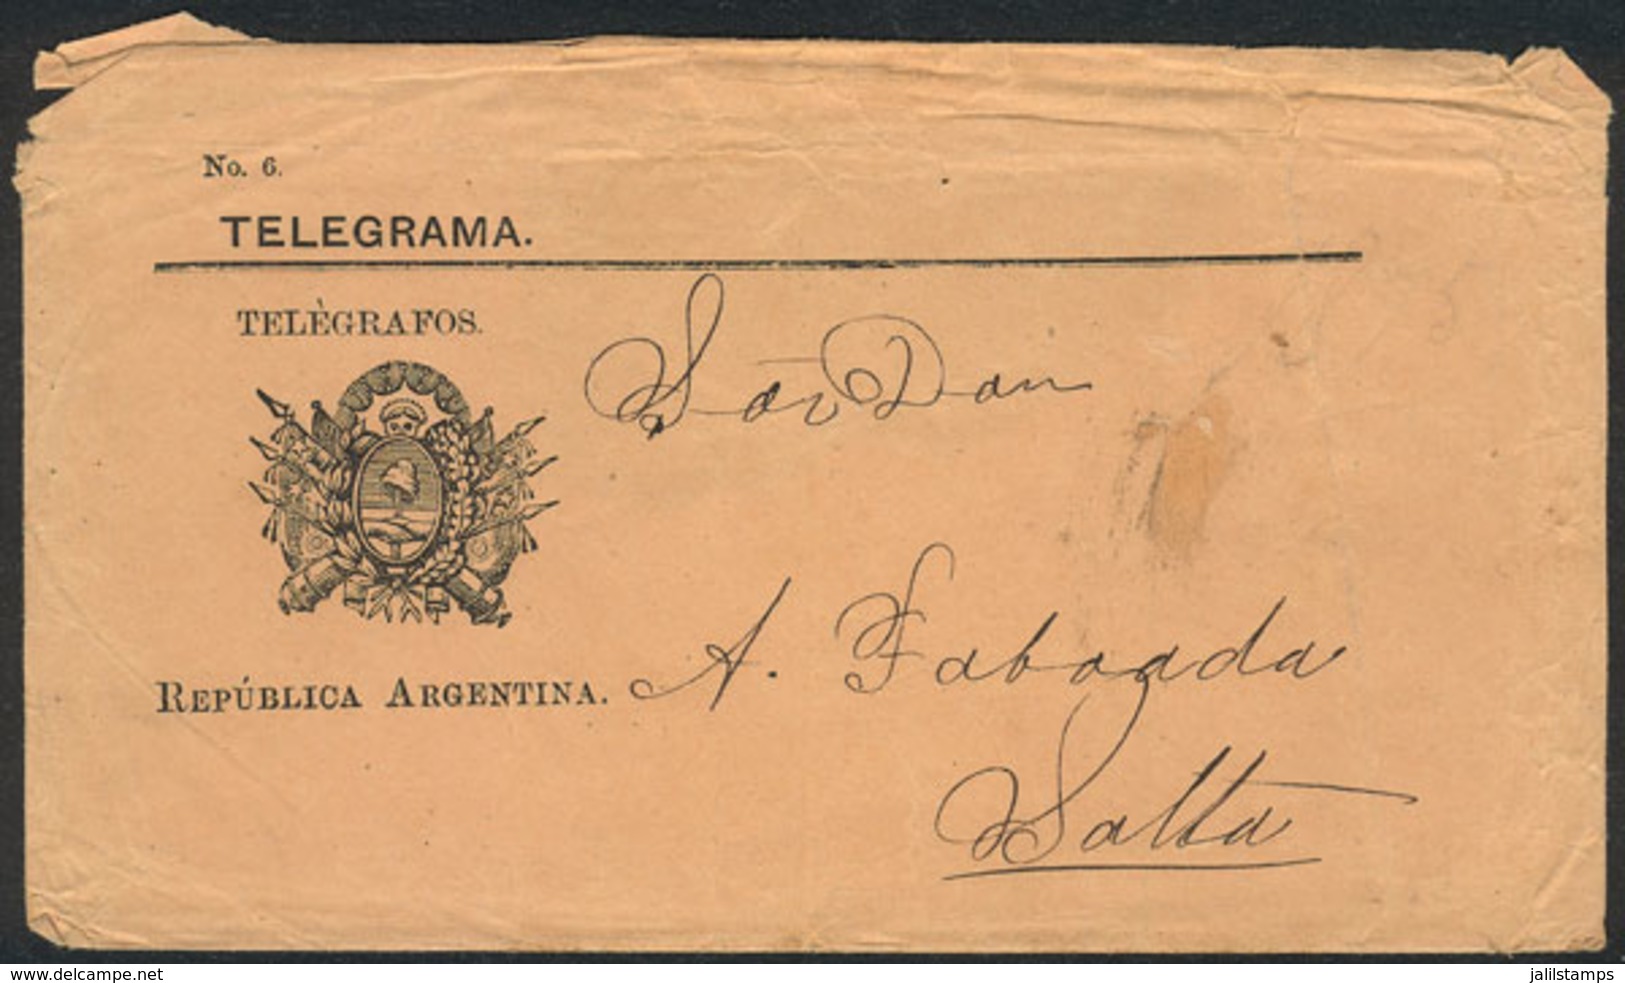 306 ARGENTINA: Circa 1887, Envelope For Telegrams (N°6), Missing The Back Flap, Very Good Front, Very Rare! - Télégraphes